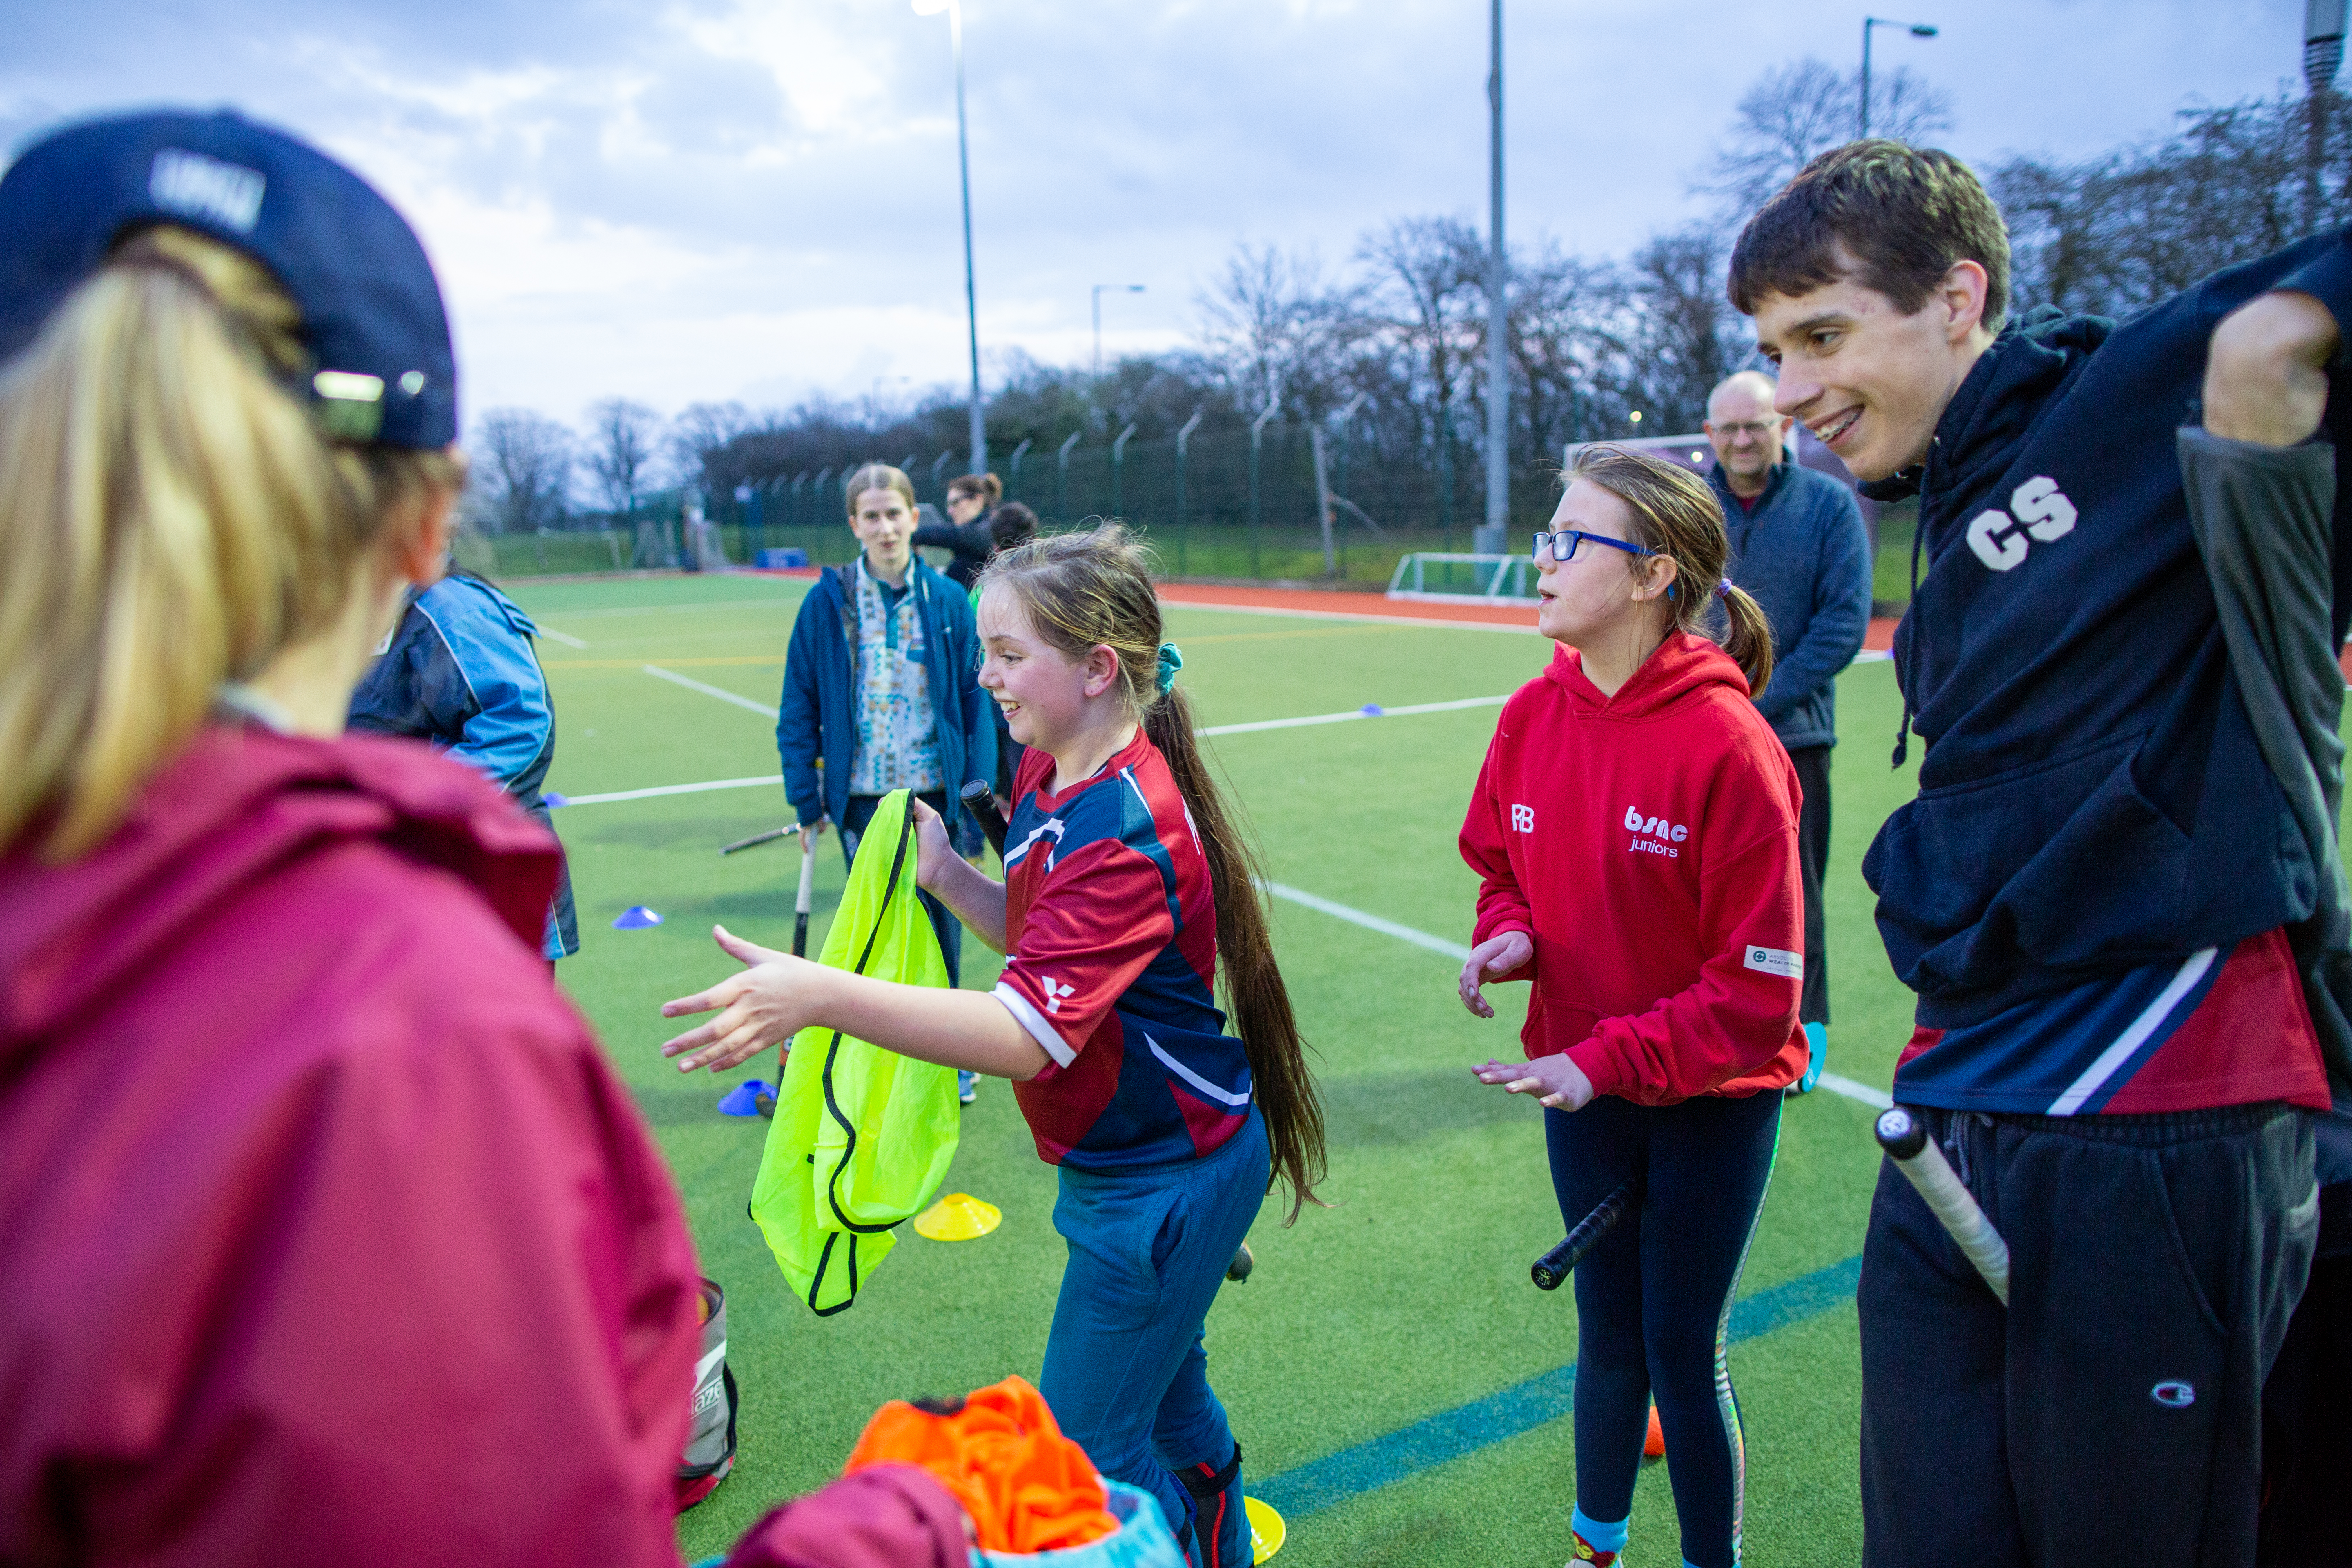 coaching children with mixed abilities - a group of young people of mixed abilities playing hockey